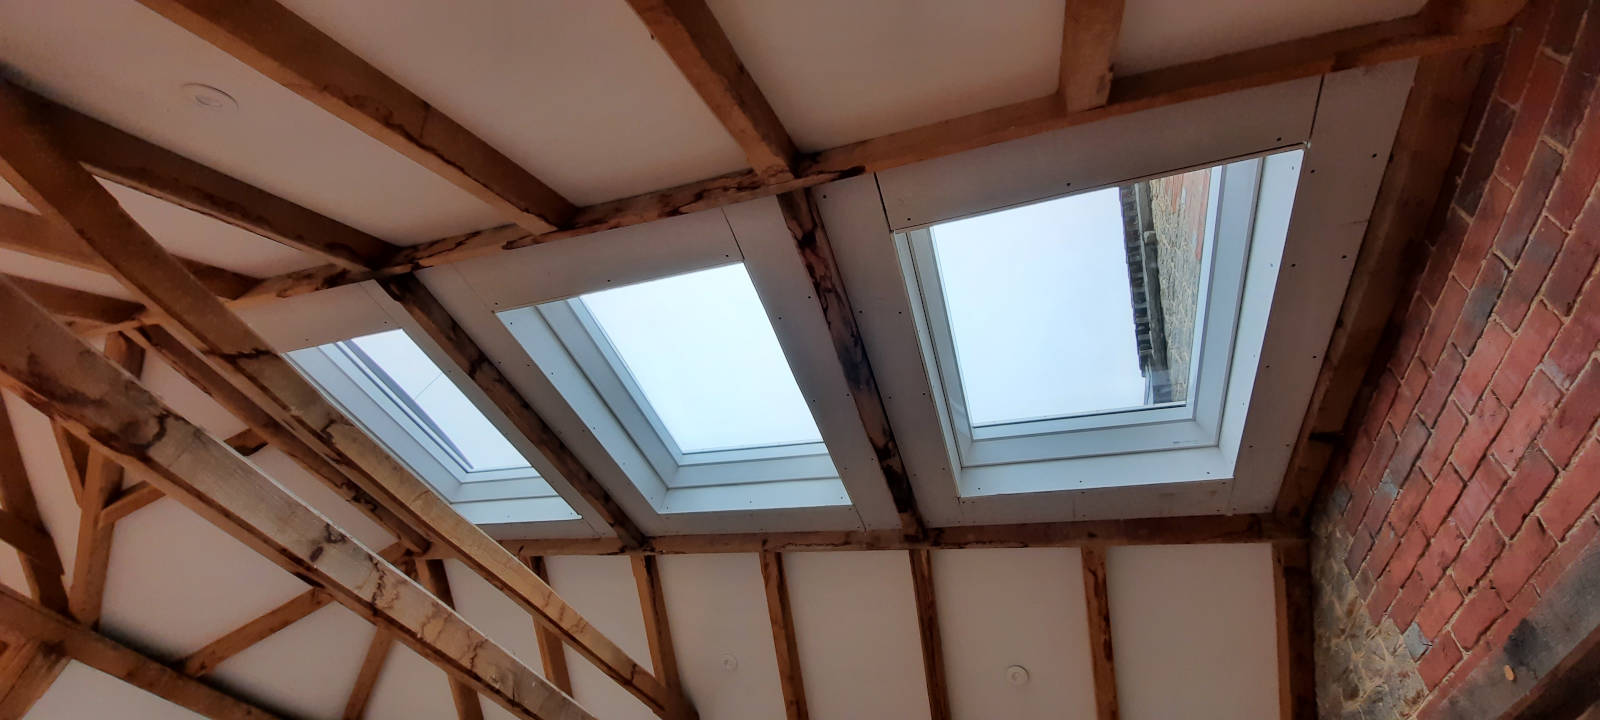 Image of mature extension flat roof windows sussex 007 <h2>2021-07-05 - Mature Sussex House Extension Rejuvenated with Velux Rooflights</h2>